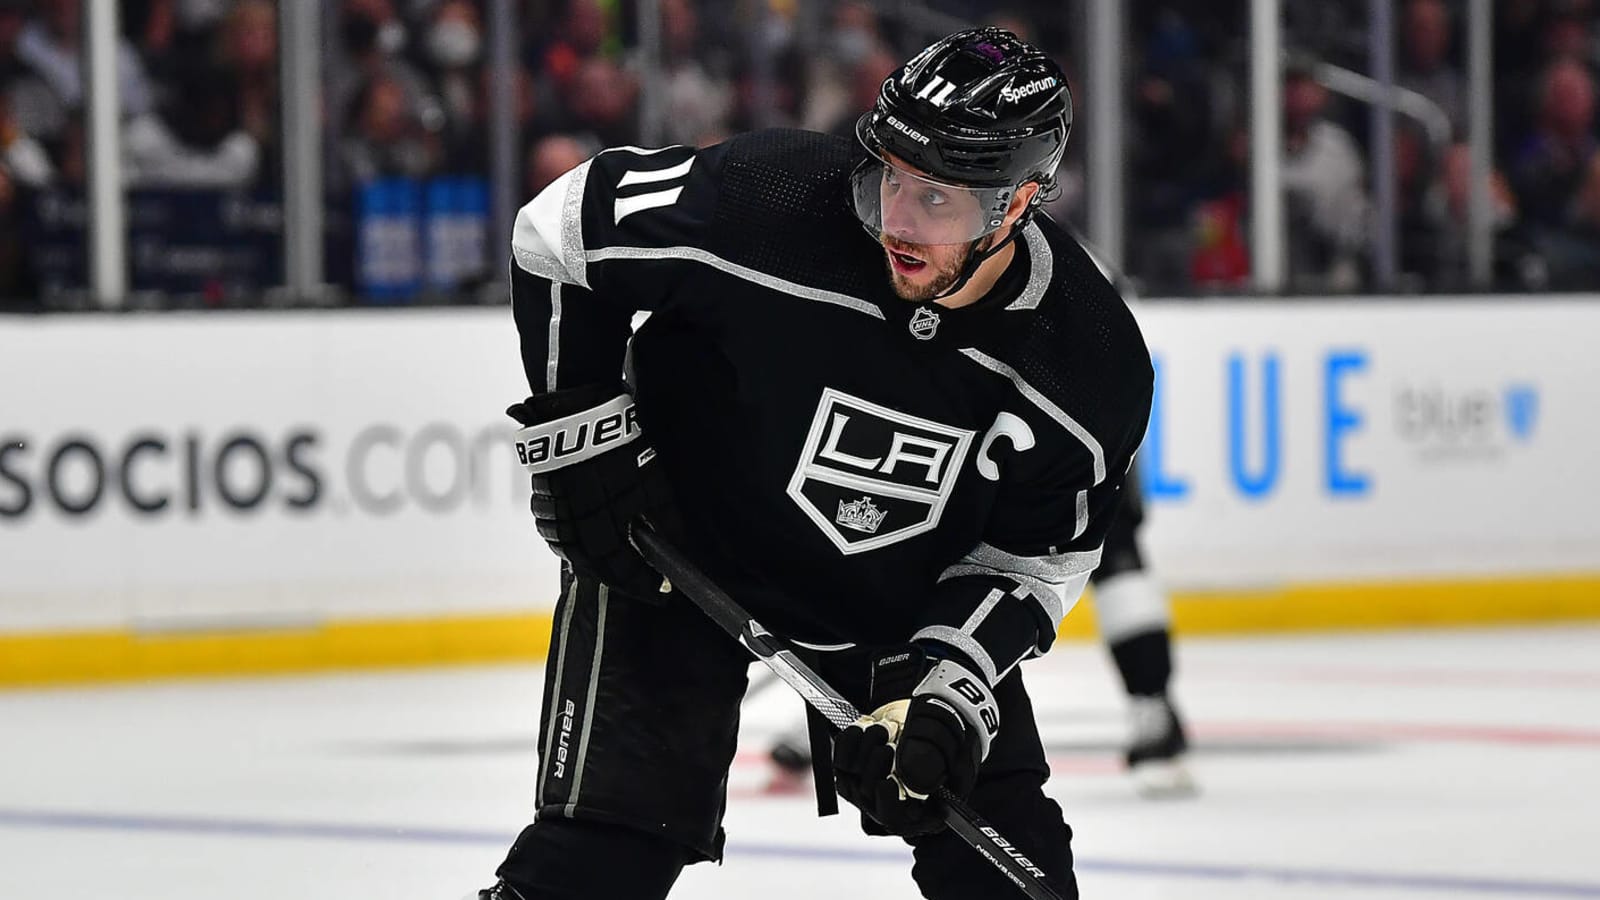 Anze Kopitar Re-Signs With LA Kings For 8 Years, $80 Million - CaliSports  News